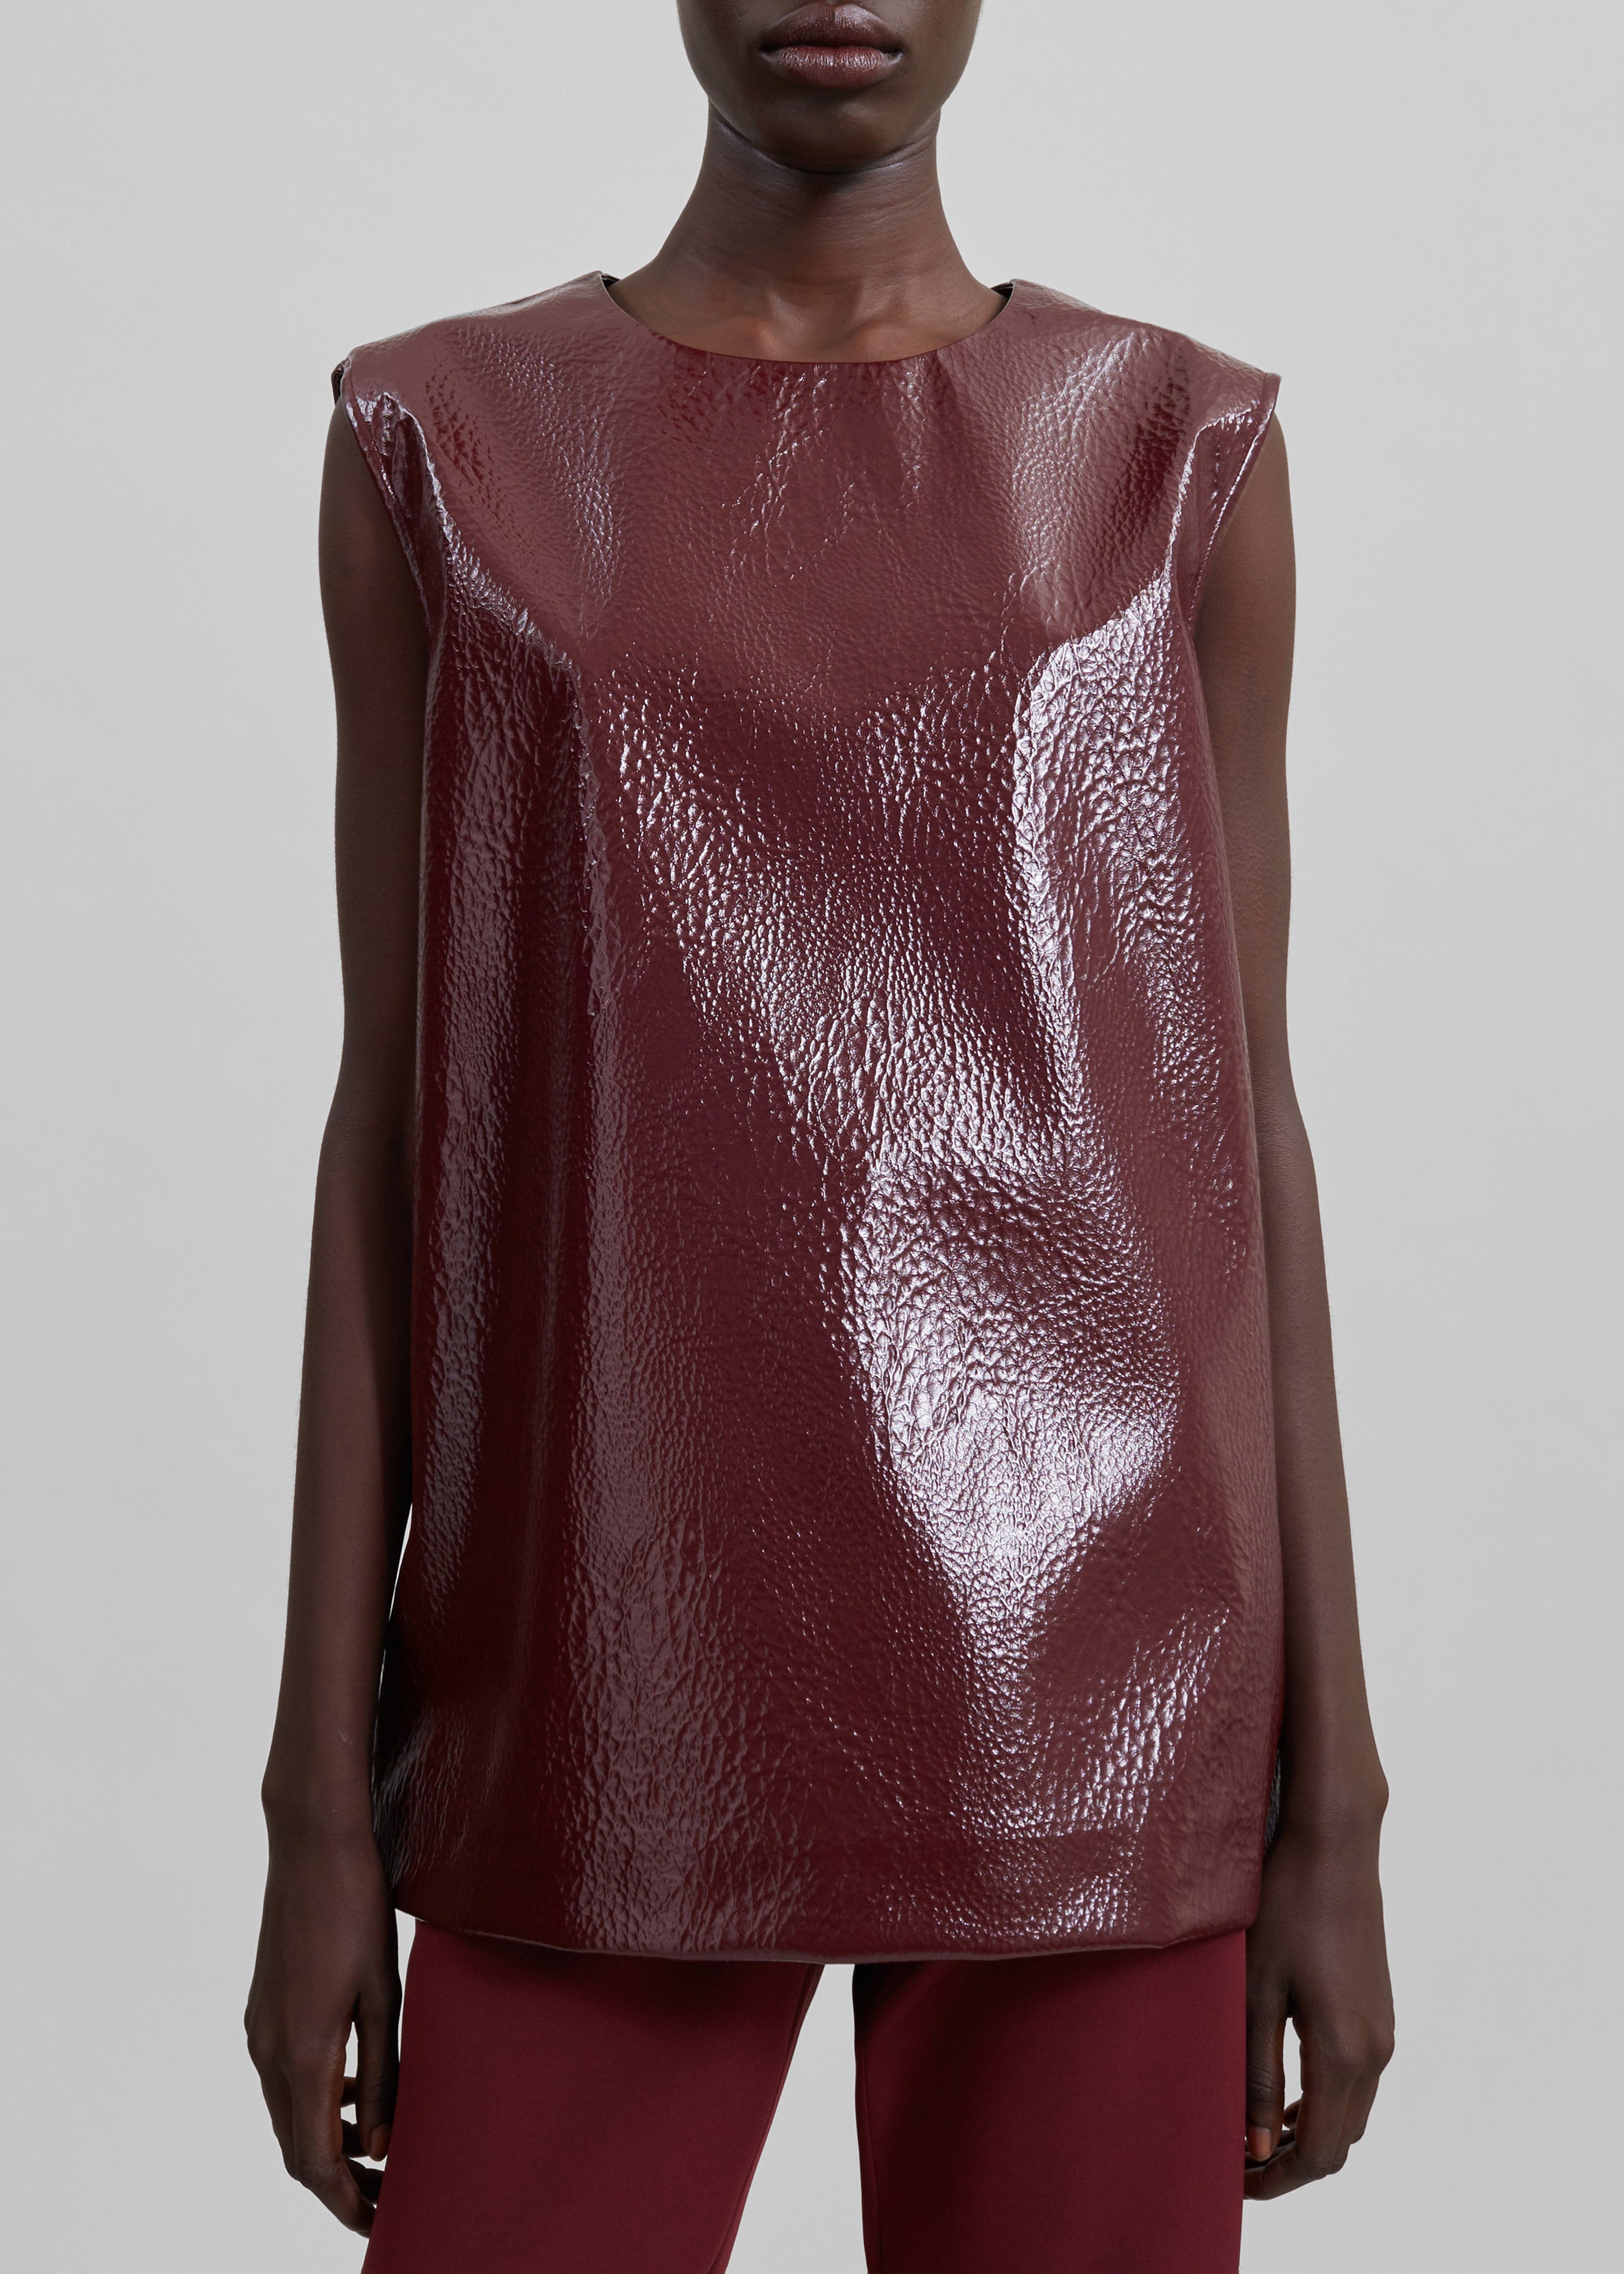 Amaris Crackled Faux Leather Tank Top - Burgundy - 4